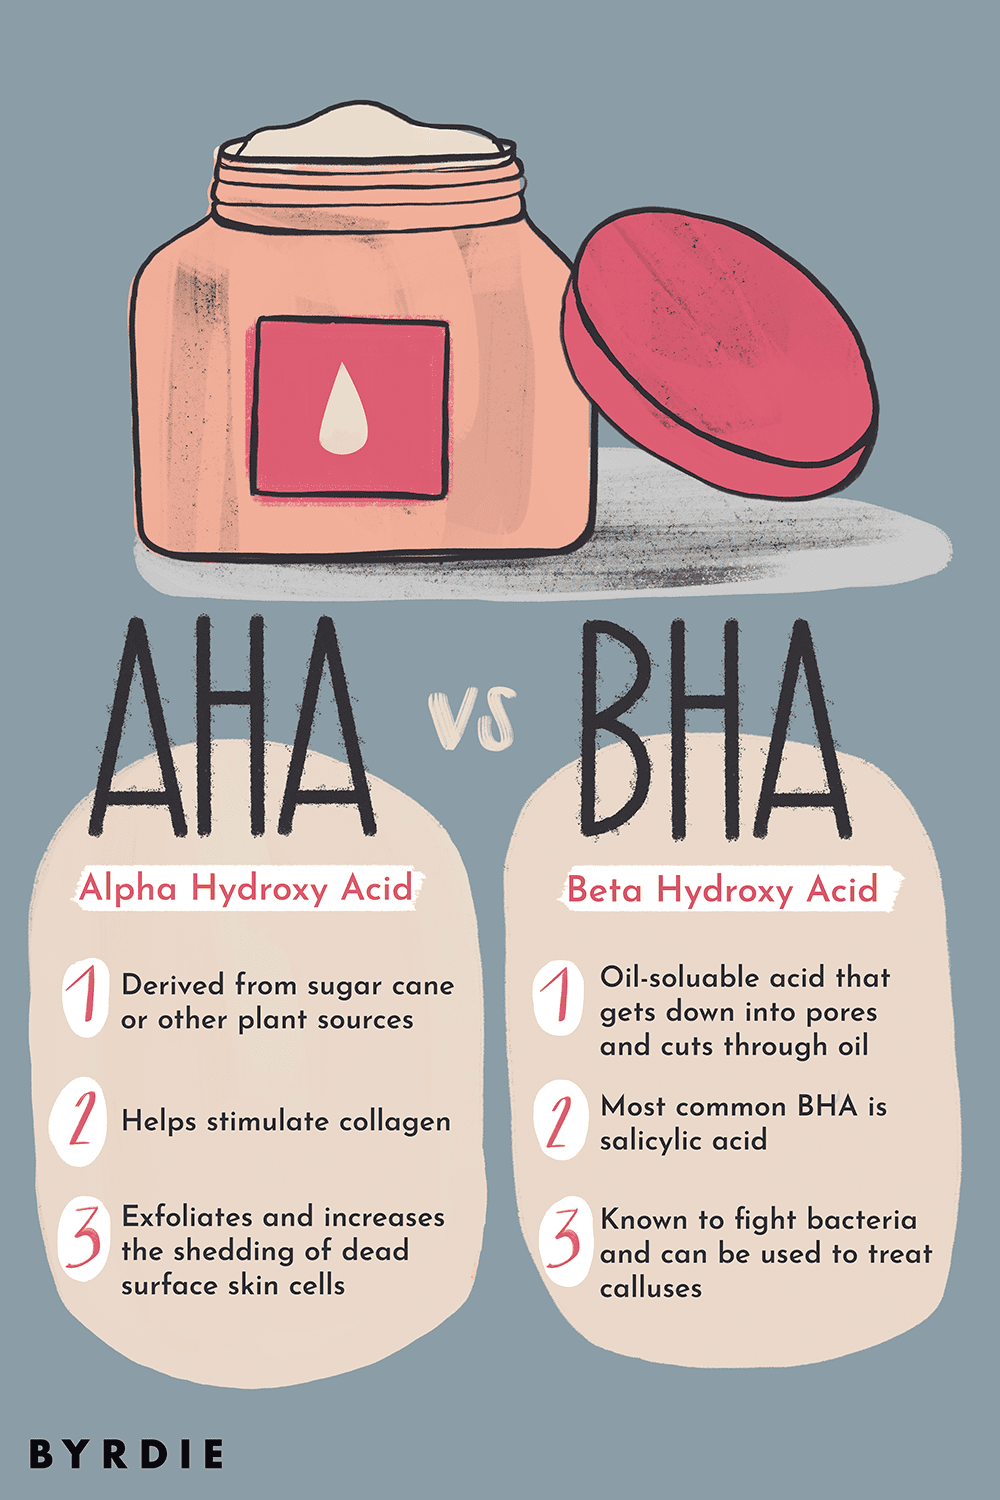 All About AHA And BHA: Which Acids For Which Skin?